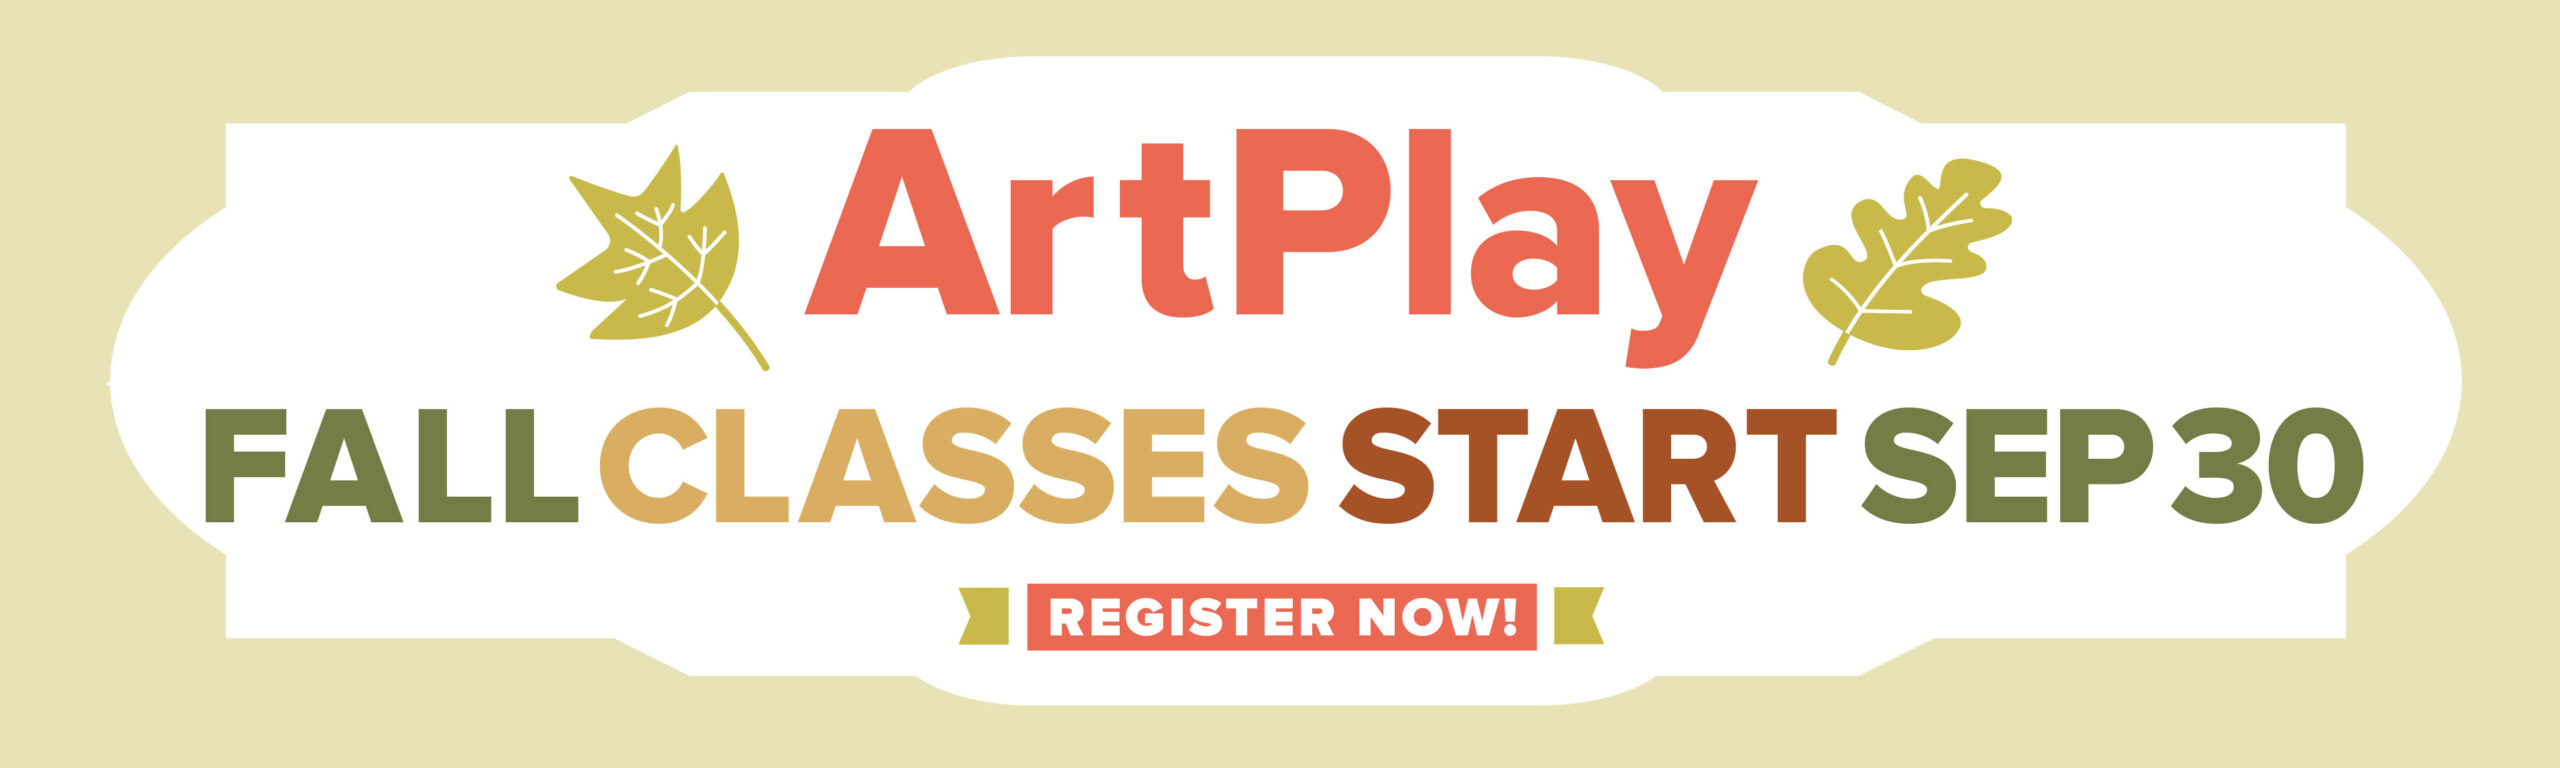 Sign up today for ArtPlay fall classes and workships beginning September 30!